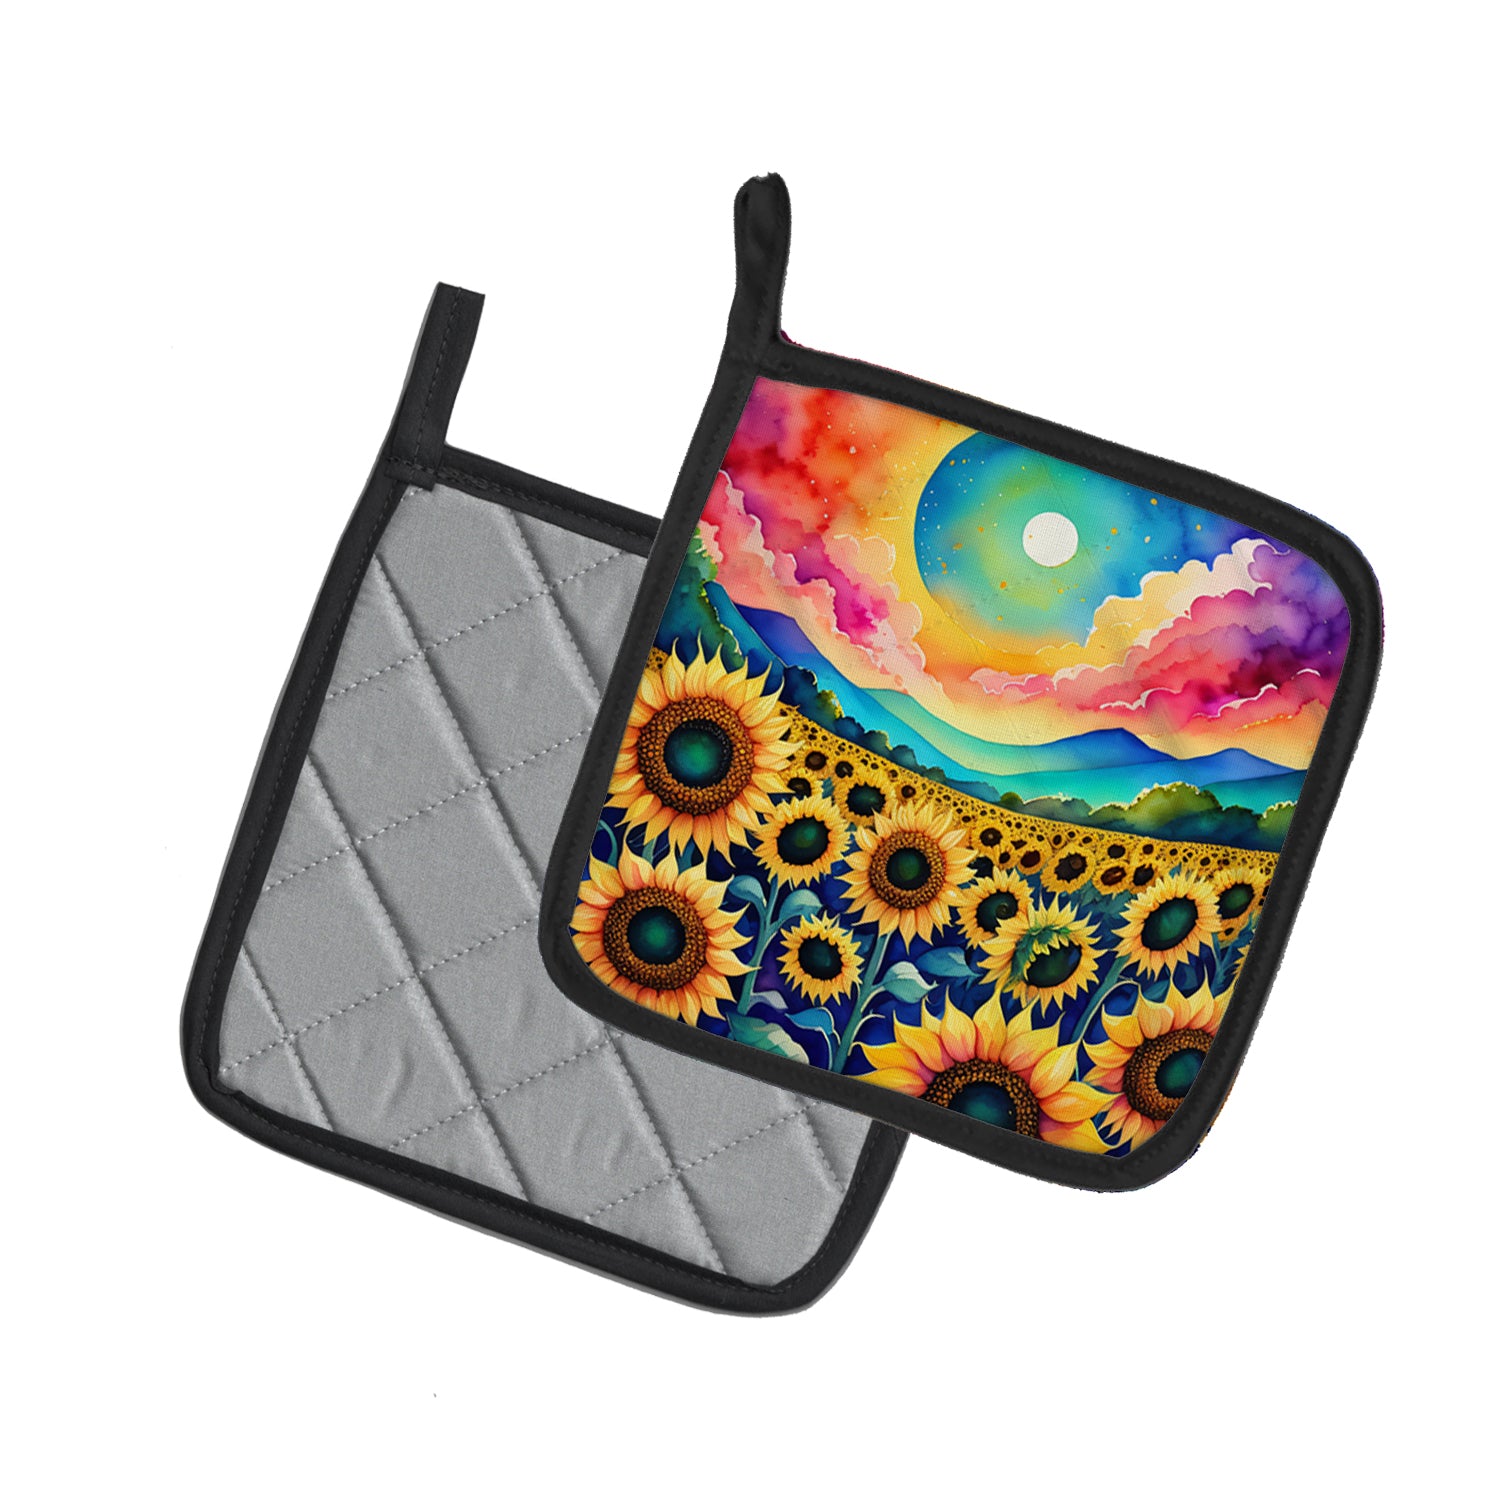 Buy this Colorful Sunflowers Pair of Pot Holders